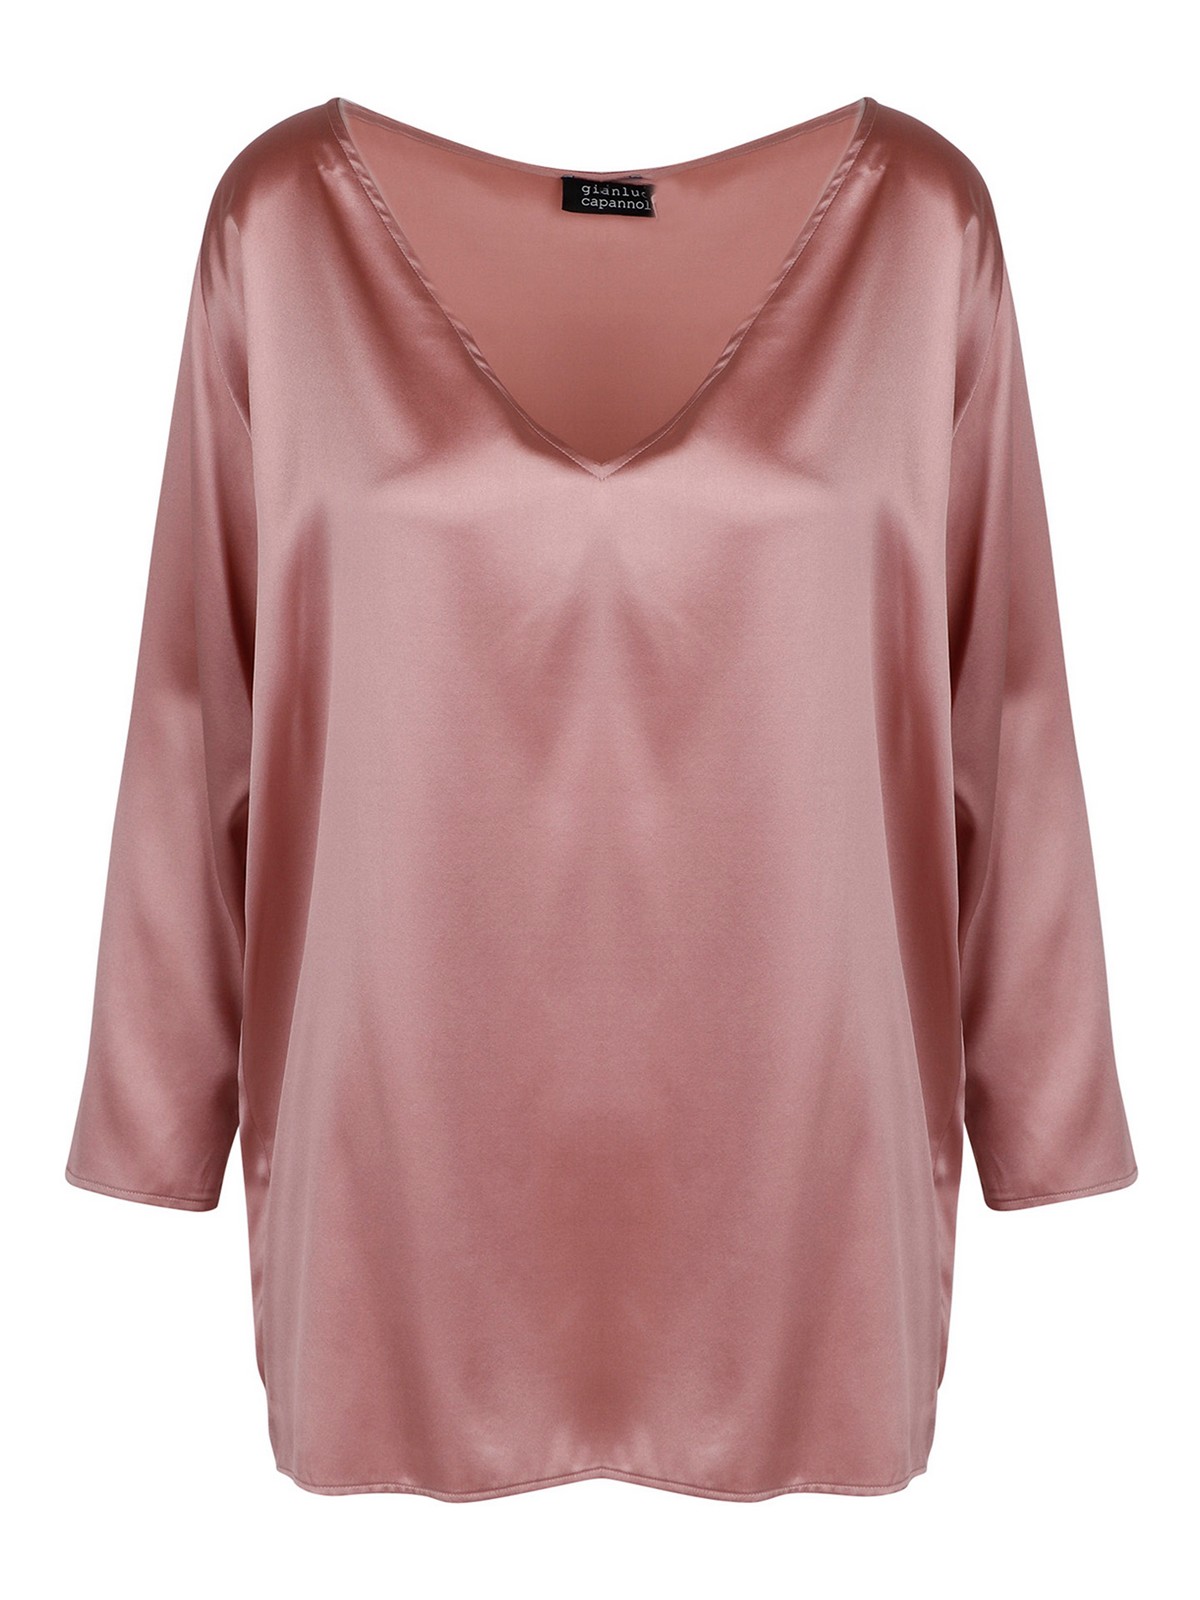 Gianluca Capannolo Nathalie Silk Blouse In Pink